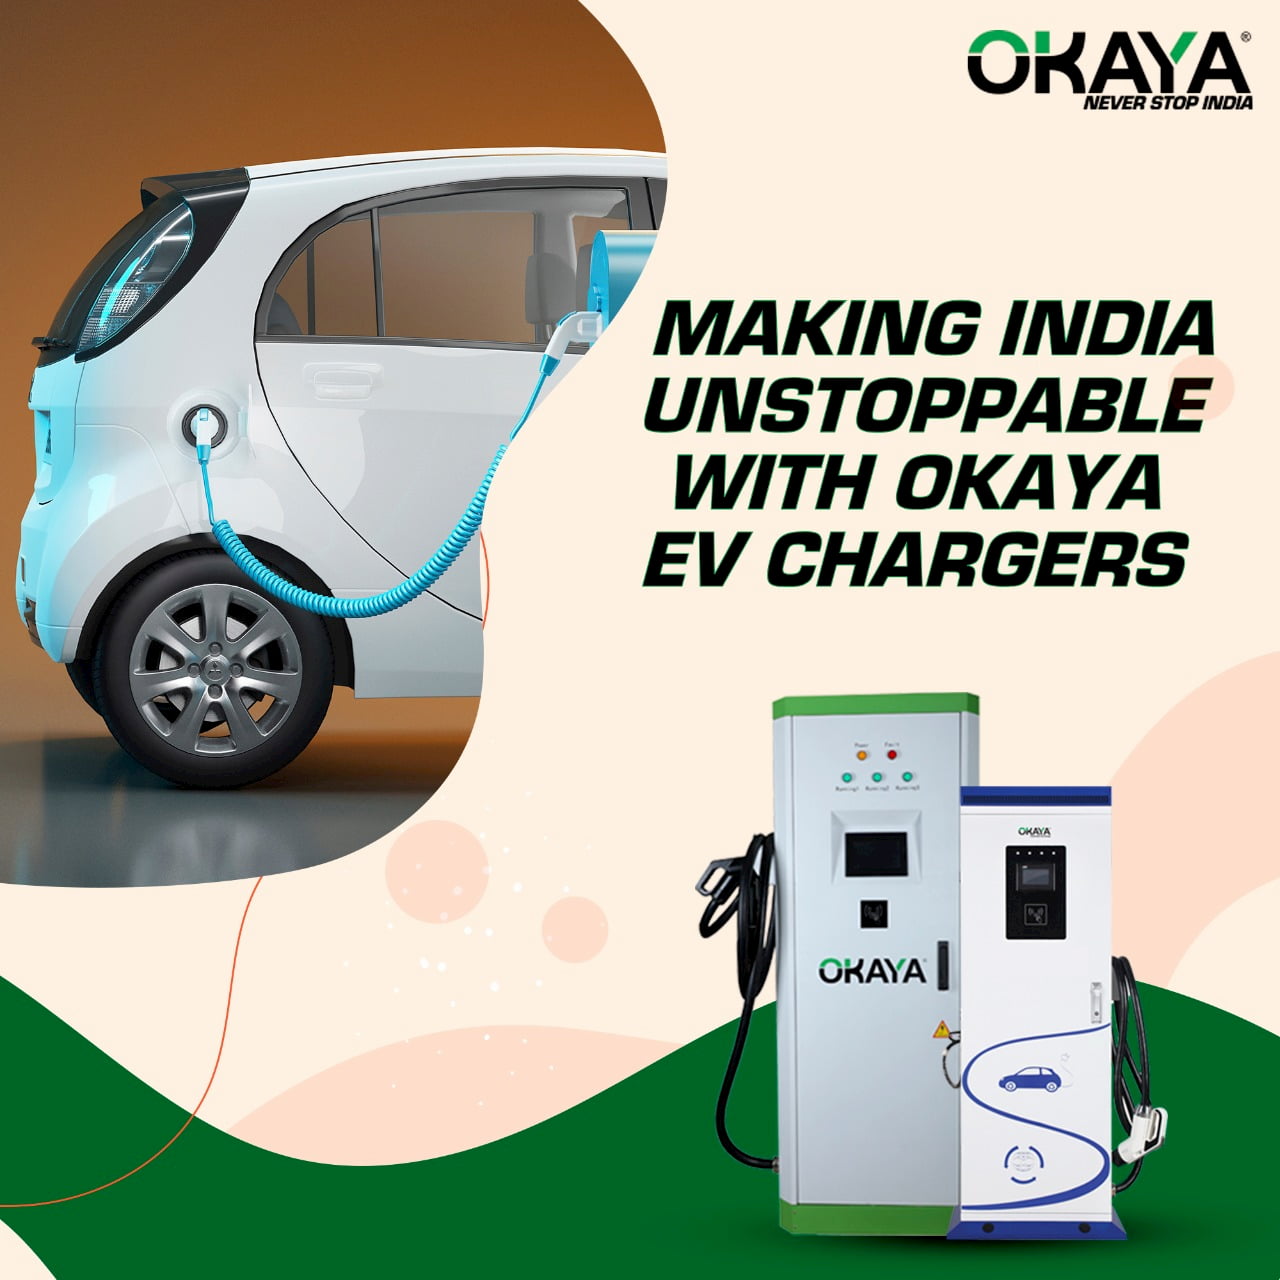 Okaya Power installs more than 500 EV chargers in India